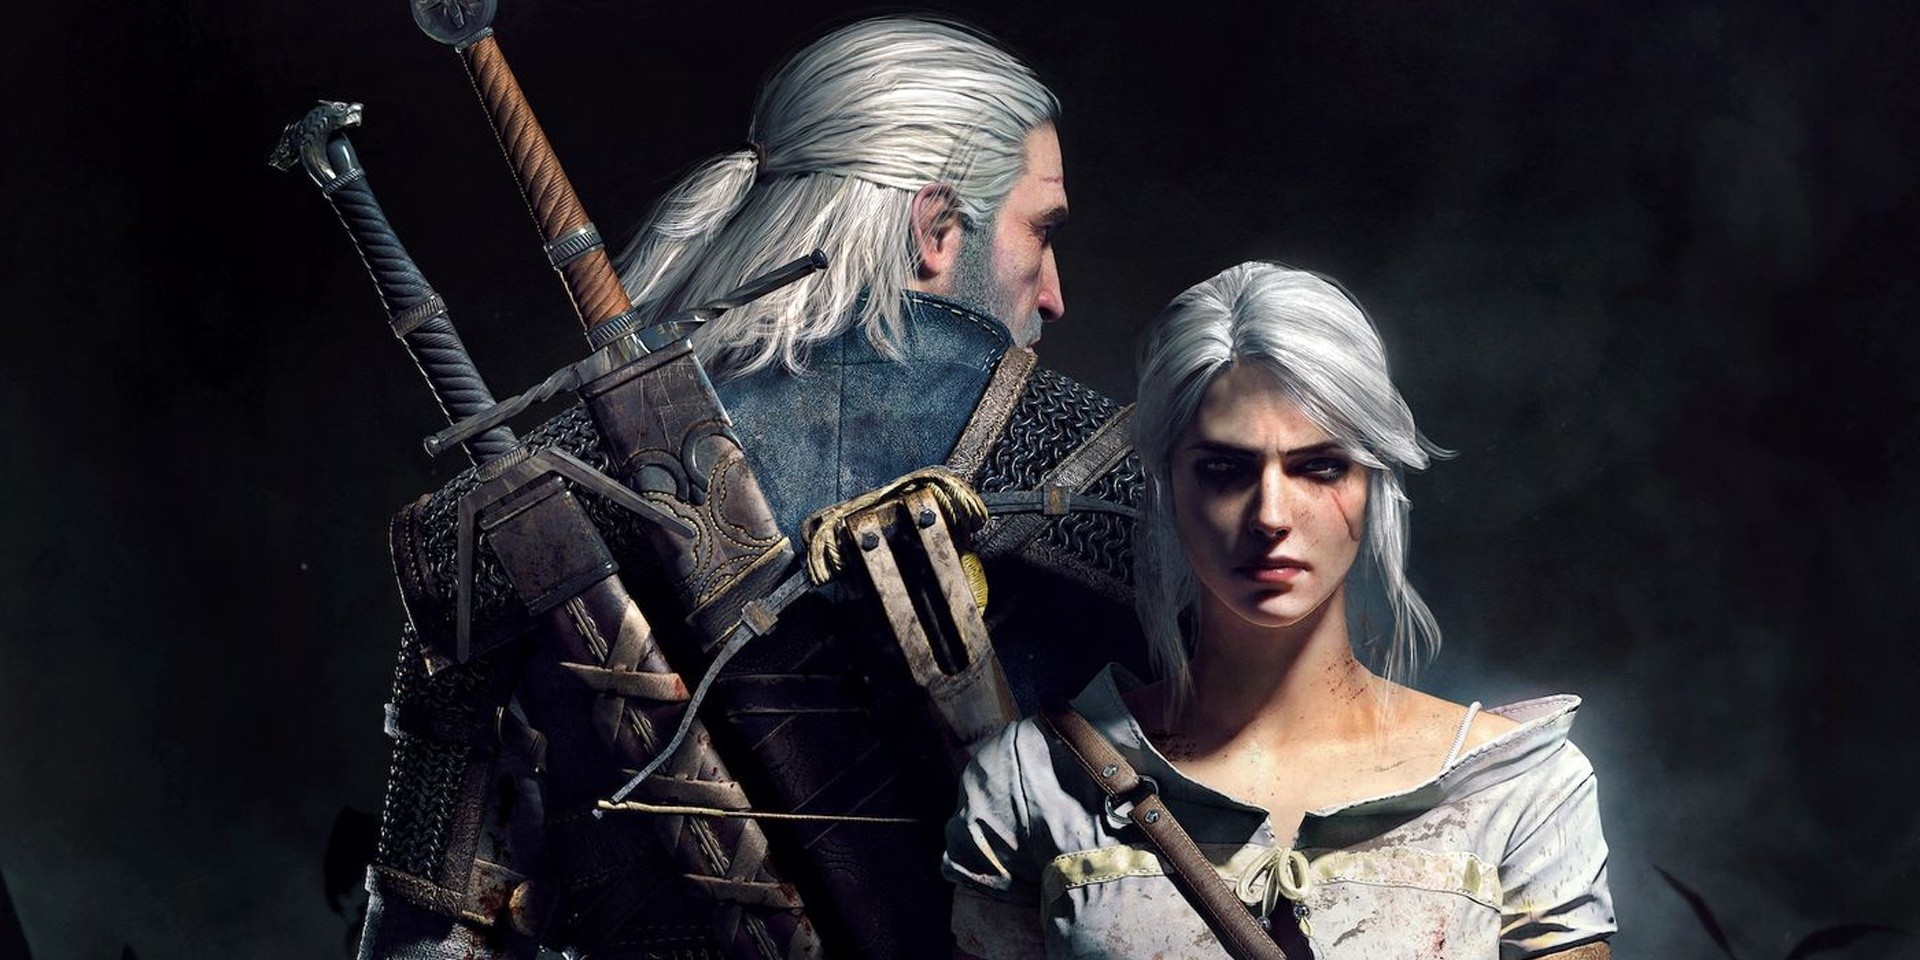 There's a new Witcher video game now in development